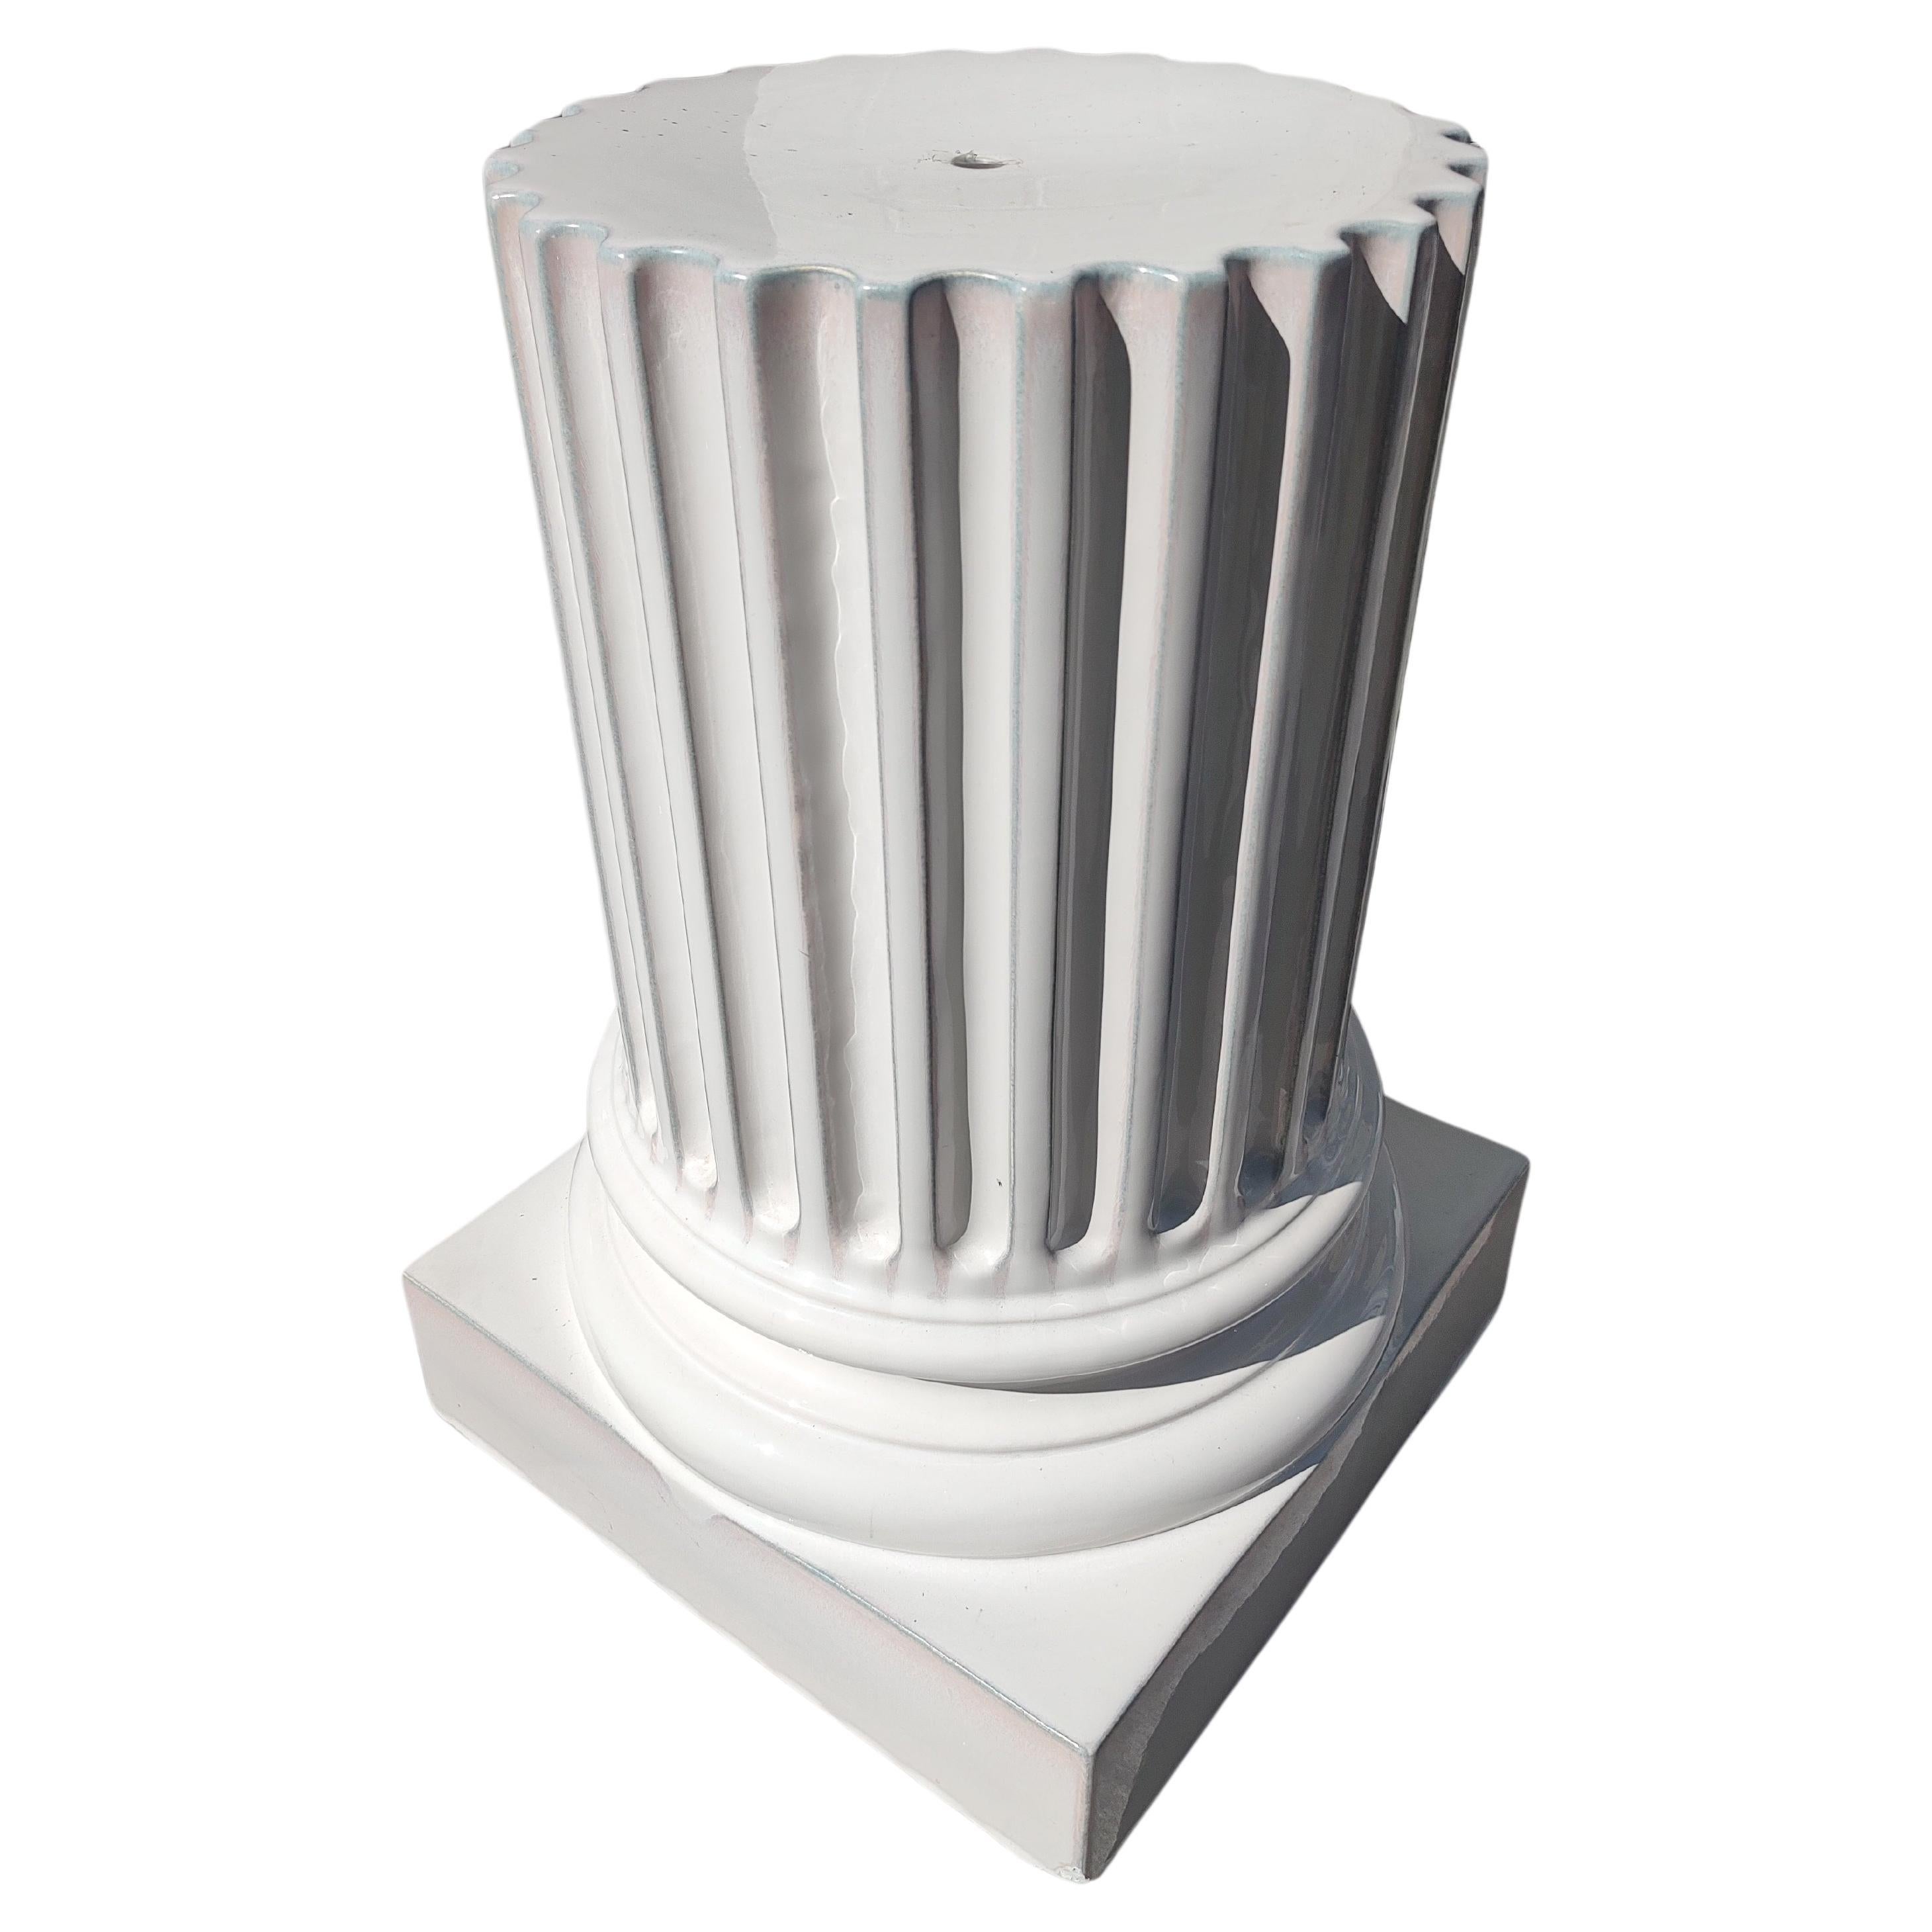 Fabulous and impressive 2 piece planter with pedestal made from clay and hand glazed. A rich striking white with fluted columns. Sitting on a thick heavy plinth base. This will make a wonderful addition to your atrium or outdoor area. In excellent